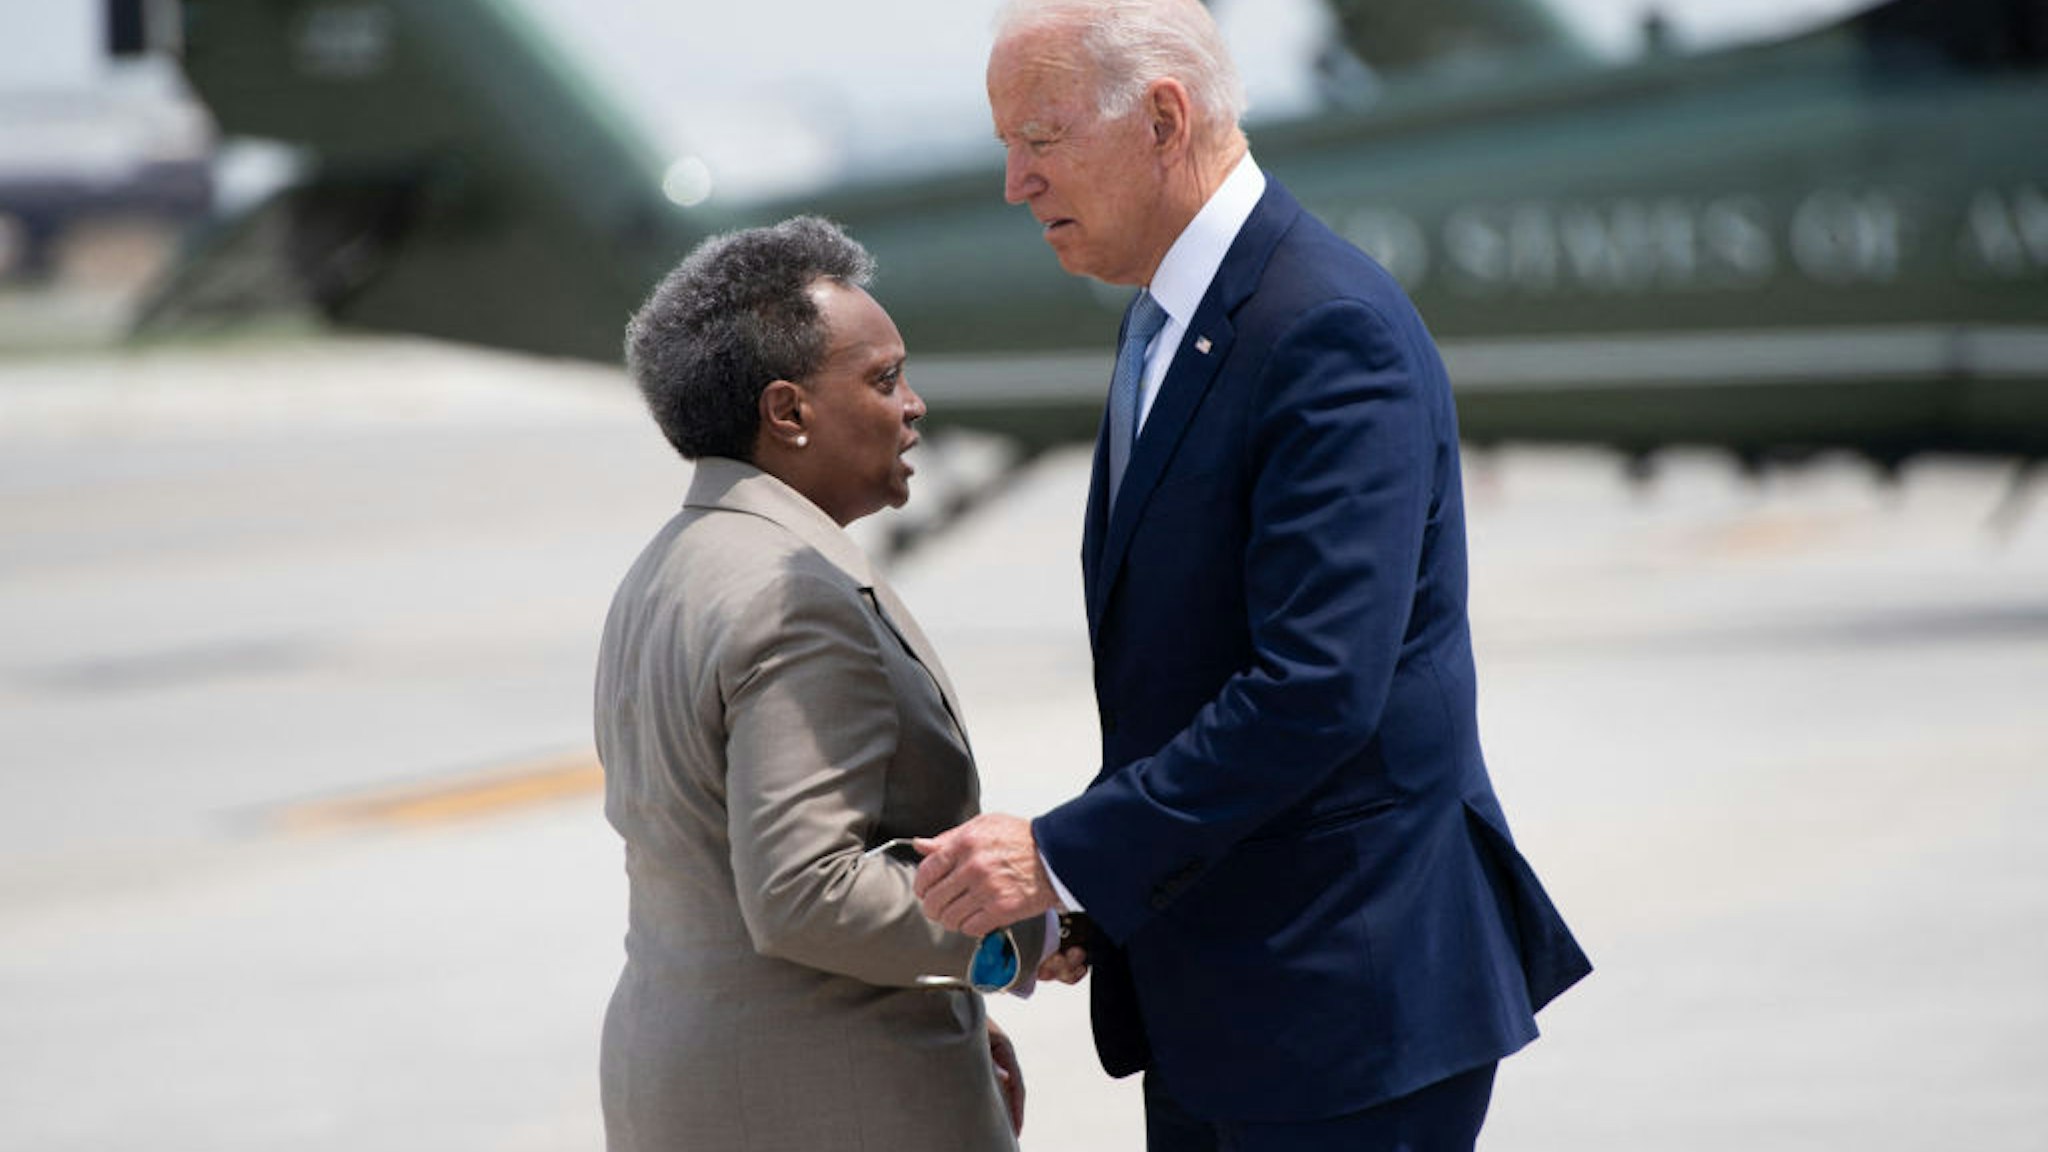 US President Joe Biden greets Chicago Mayor Lori Lightfoot (L) as he disembarks from Air Force One upon arrival at O'Hare International Airport in Chicago, Illinois, July 7, 2021, as he travels to promote his economic plans in Illinois. (Photo by SAUL LOEB / AFP) (Photo by SAUL LOEB/AFP via Getty Images)